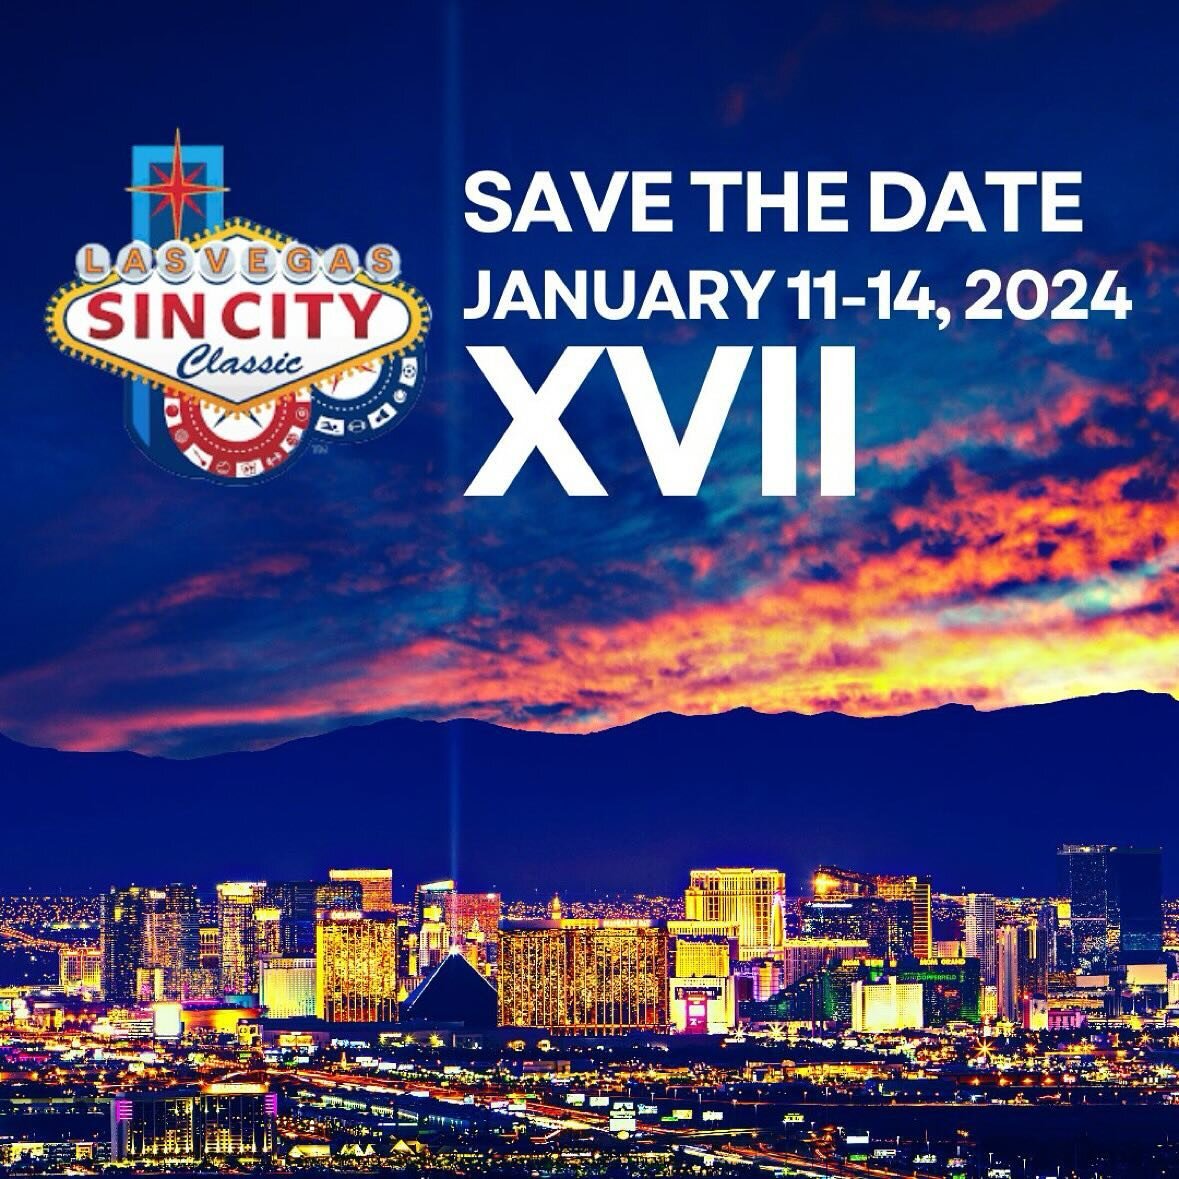 Are you naughty or nice?

If naughty, the Sin City Classic is looking for you.

24 different LGBT sports! 
Over 1000 players! 

Las Vegas, Nevada
January 11th through the 14th
Perfect place to be naughty

NGFFL Sin City Classic.
Bring your team or re